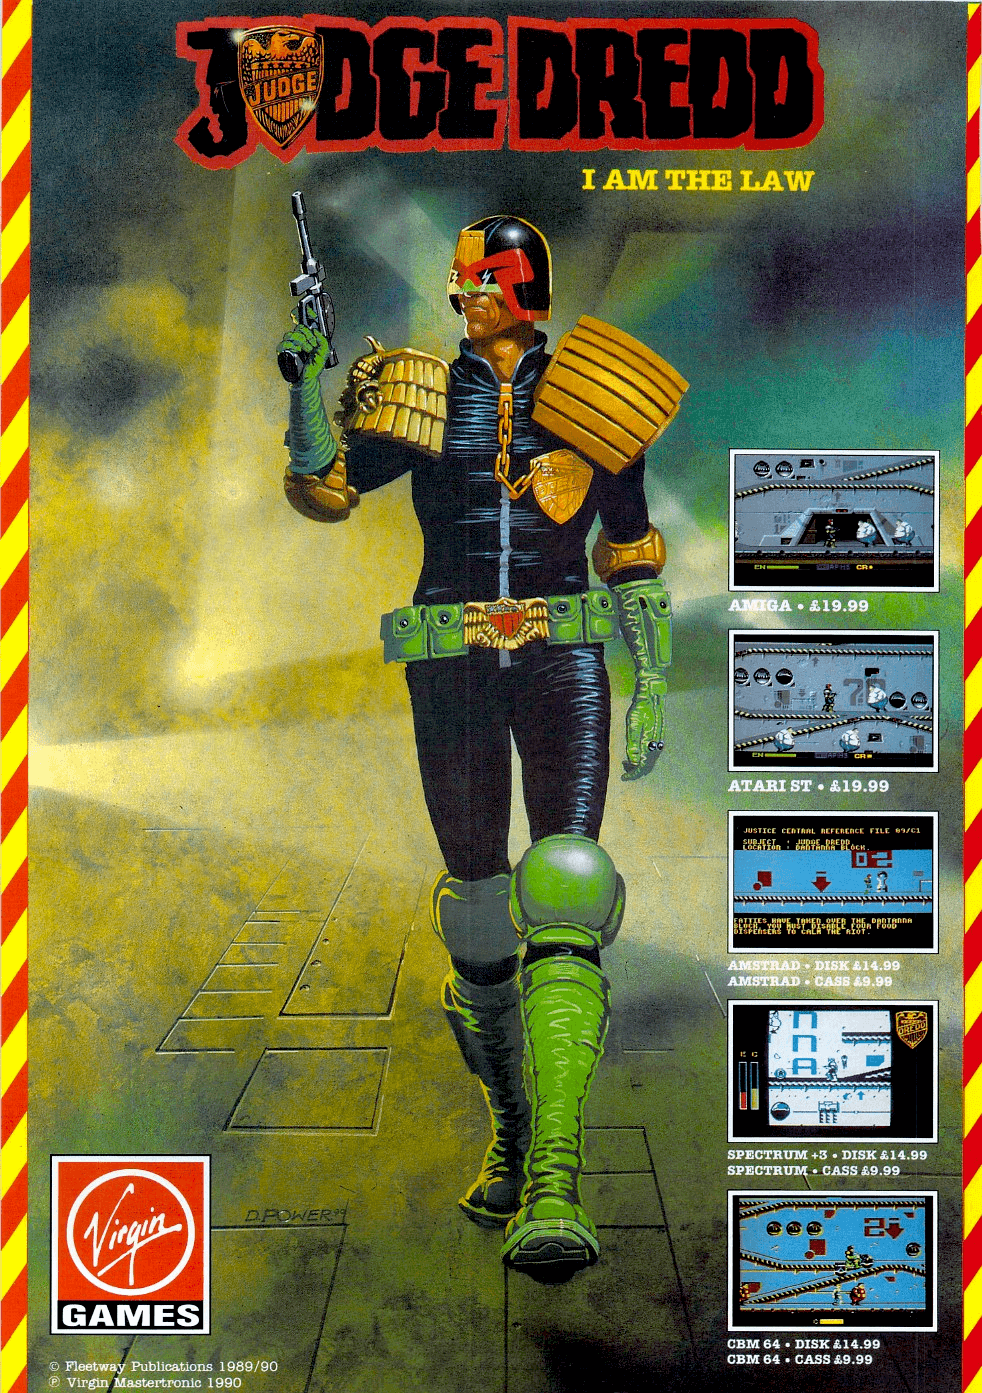 Image For Post | **Amiga/Atari ST/C64 - 1990**  


**Description**  Just another day for Judge Dredd in Mega City One as he fights crime and tries to return the city back to some normality. You play the Judge as he tries to attempt six missions of crime. Once a mission is completed there is a bonus level related to the last mission to attempt. Take too long to complete a mission and the crime rate rises. Let the rate get too high and it's game over.

To aid the Judge you have various weapons to fire and also your Lawmaster bike. This allows you to move around faster but you can't fire your weapon or arrest people thus making the crime rate rise.

Judge Dredd is a side view platform game that scrolls as you move left or right. Pressing the space bar allows you to change from walking to riding your bike. The joystick controls your character while the fire button shoots your weapon.

**Unreleased 8-bit ports**  
Virgin announced and advertised the release of the game also for the ZX Spectrum and Amstrad CPC, but both versions were never released. 

At least the Spectrum version existed in a playable version, as the magazine Computer and Video Games reviewed this version in their issue #111 (February 1991). It was rated 54/100.

**Alternate Titles**  
    "Judge Dredd: I am the Law" -- Tag-lined title